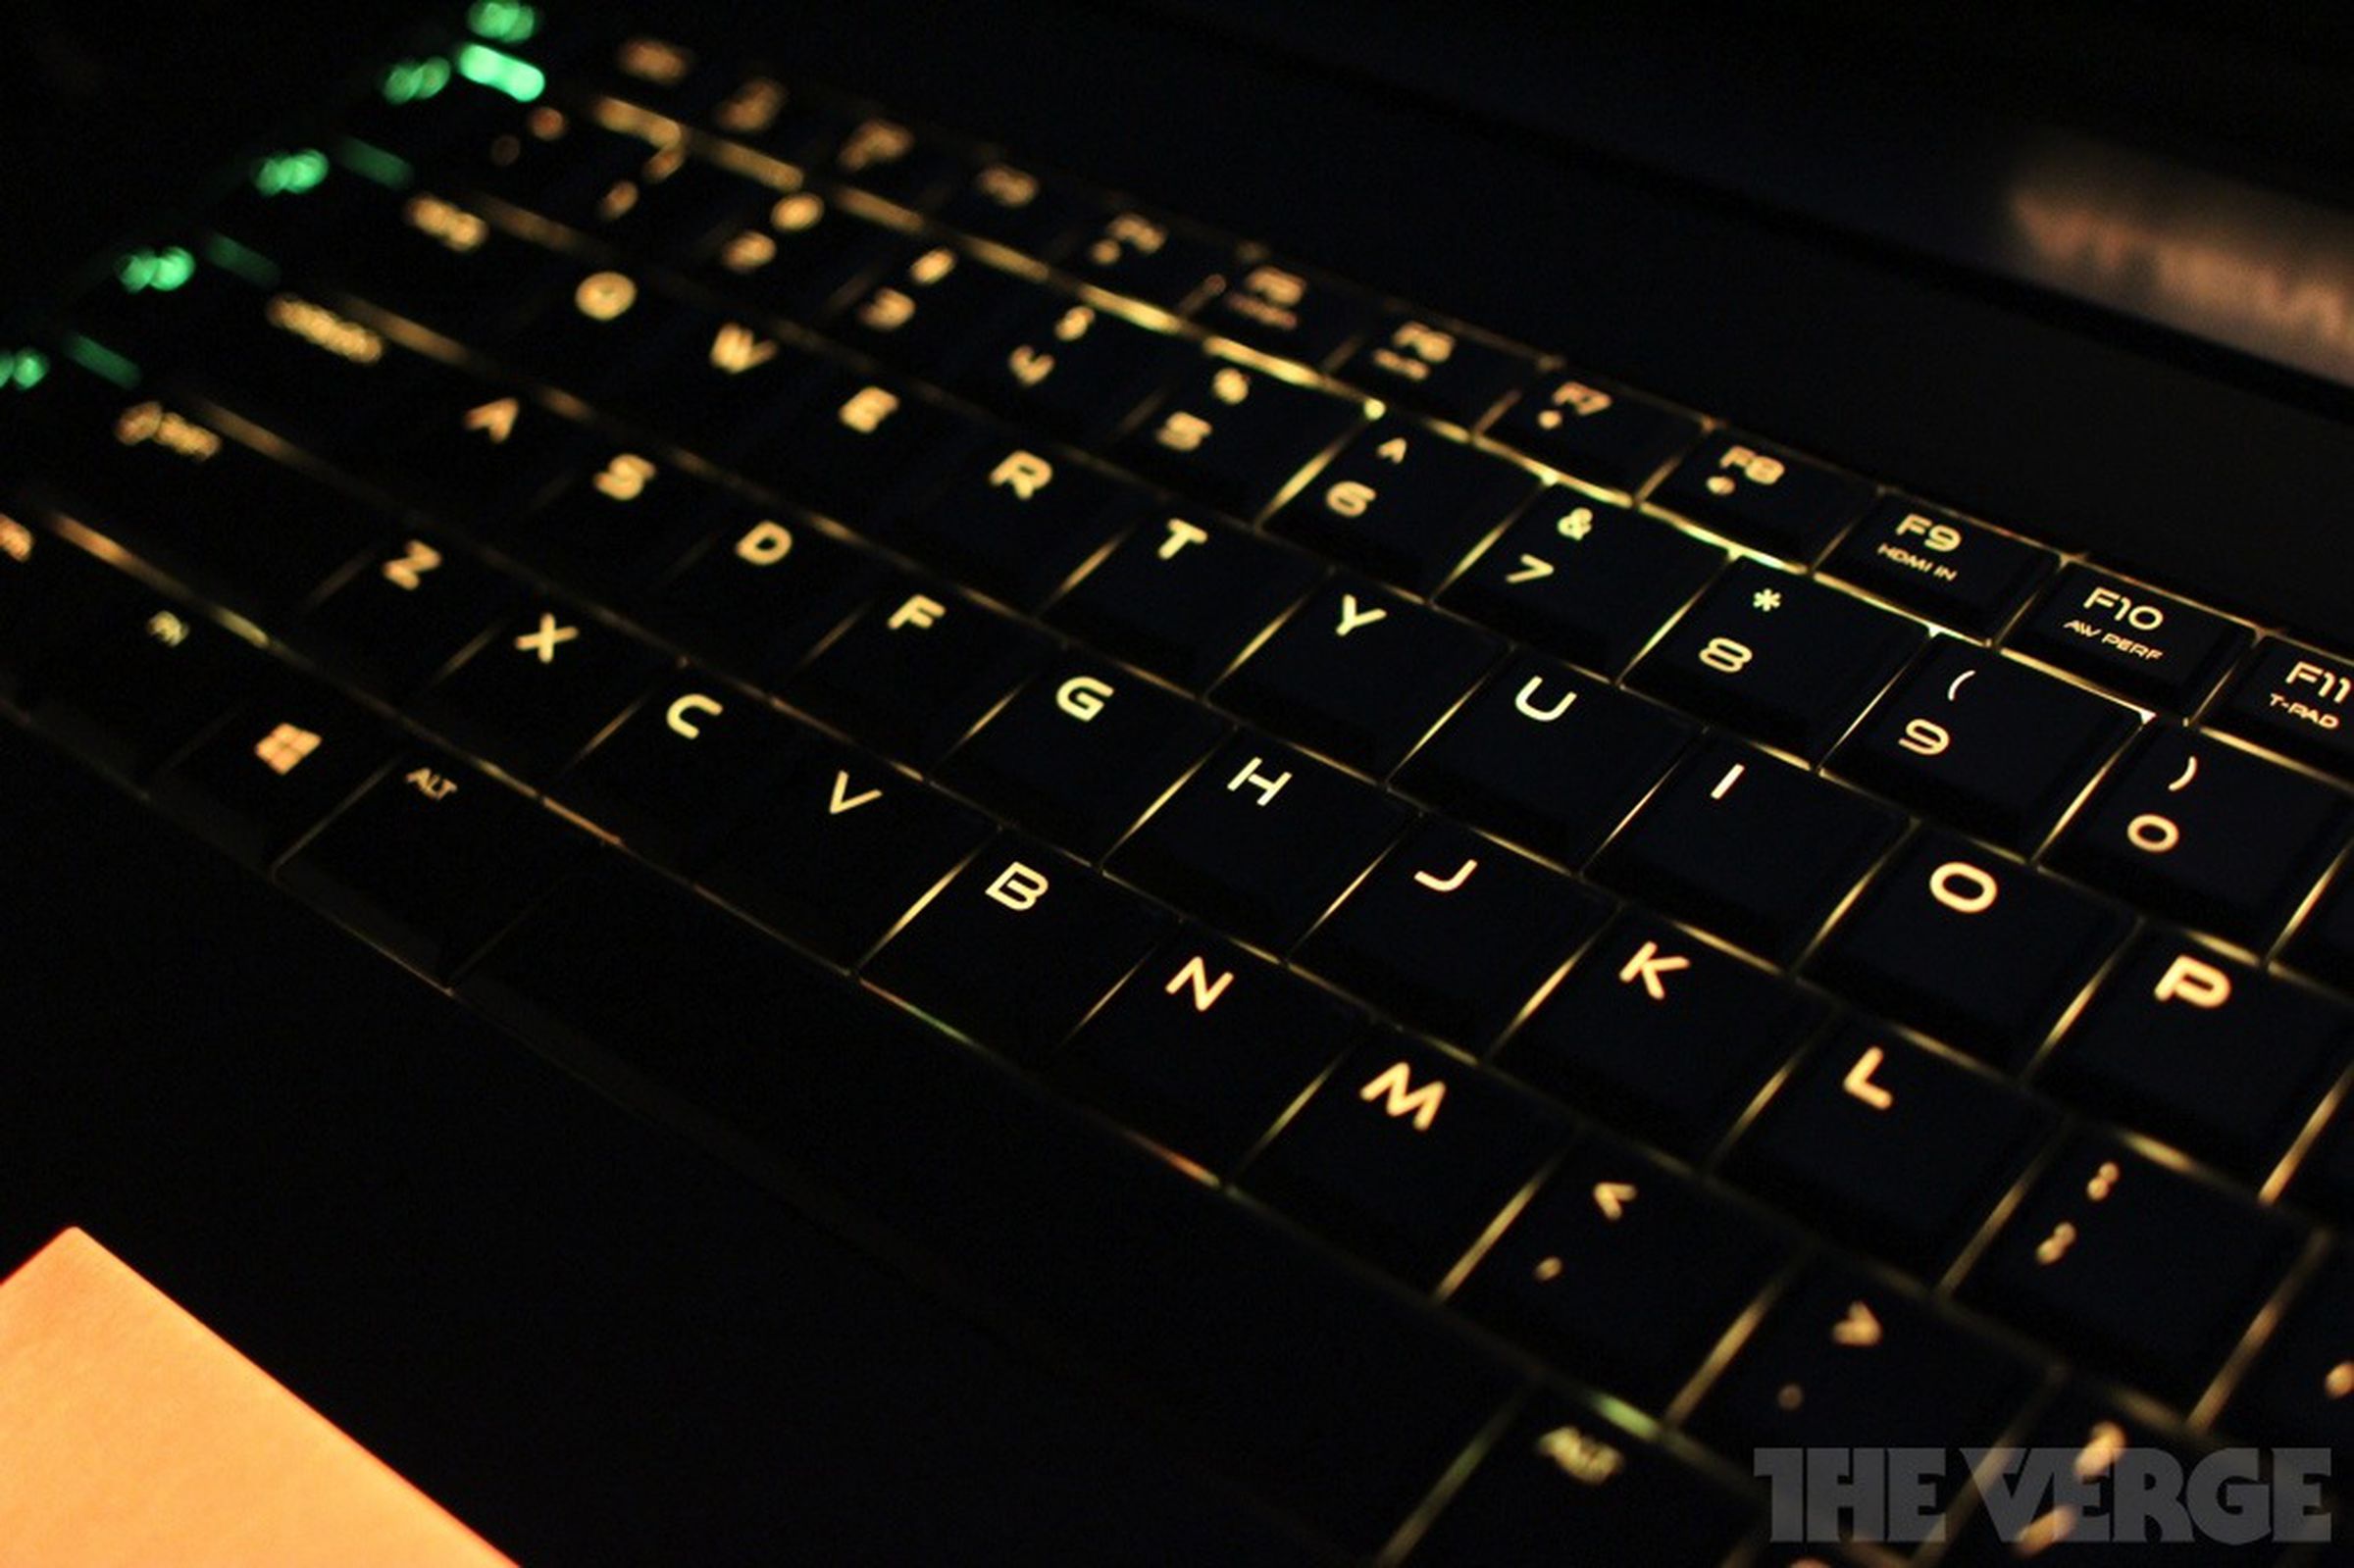 Alienware 14, 17, and 18 hands-on pictures